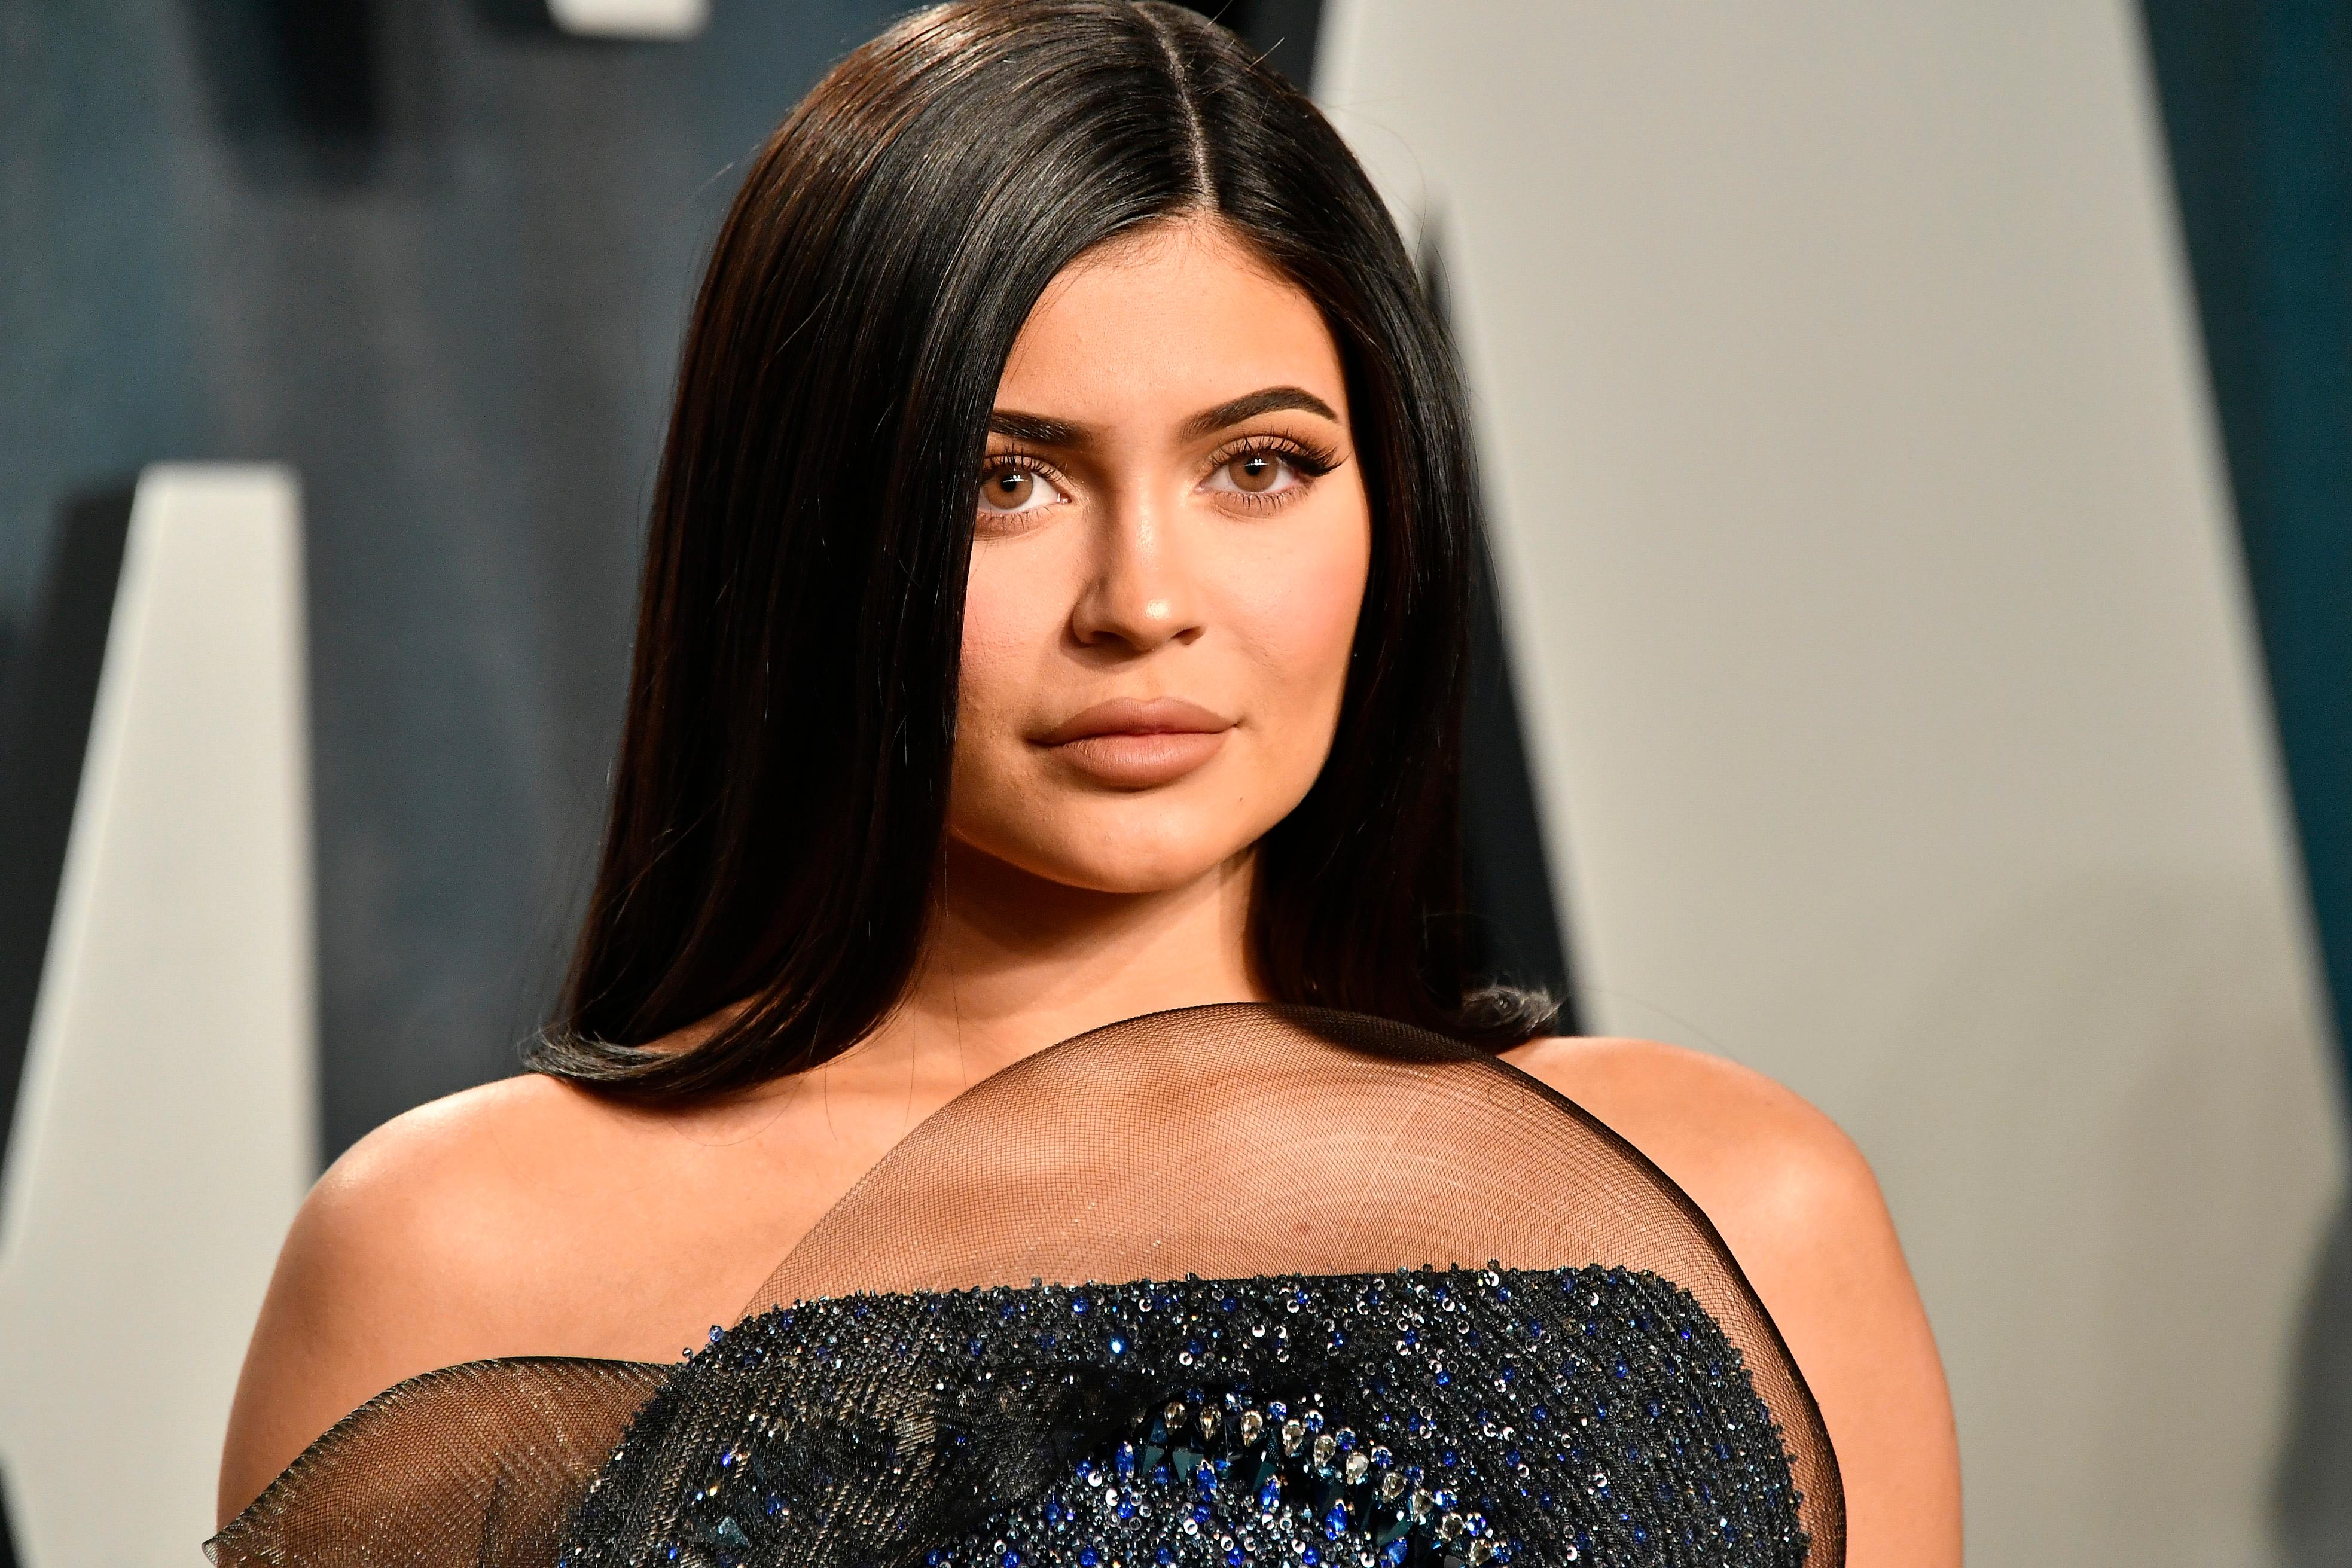 Kylie Jenner Stepped Outside Of Home Without Makeup And Natural Hair